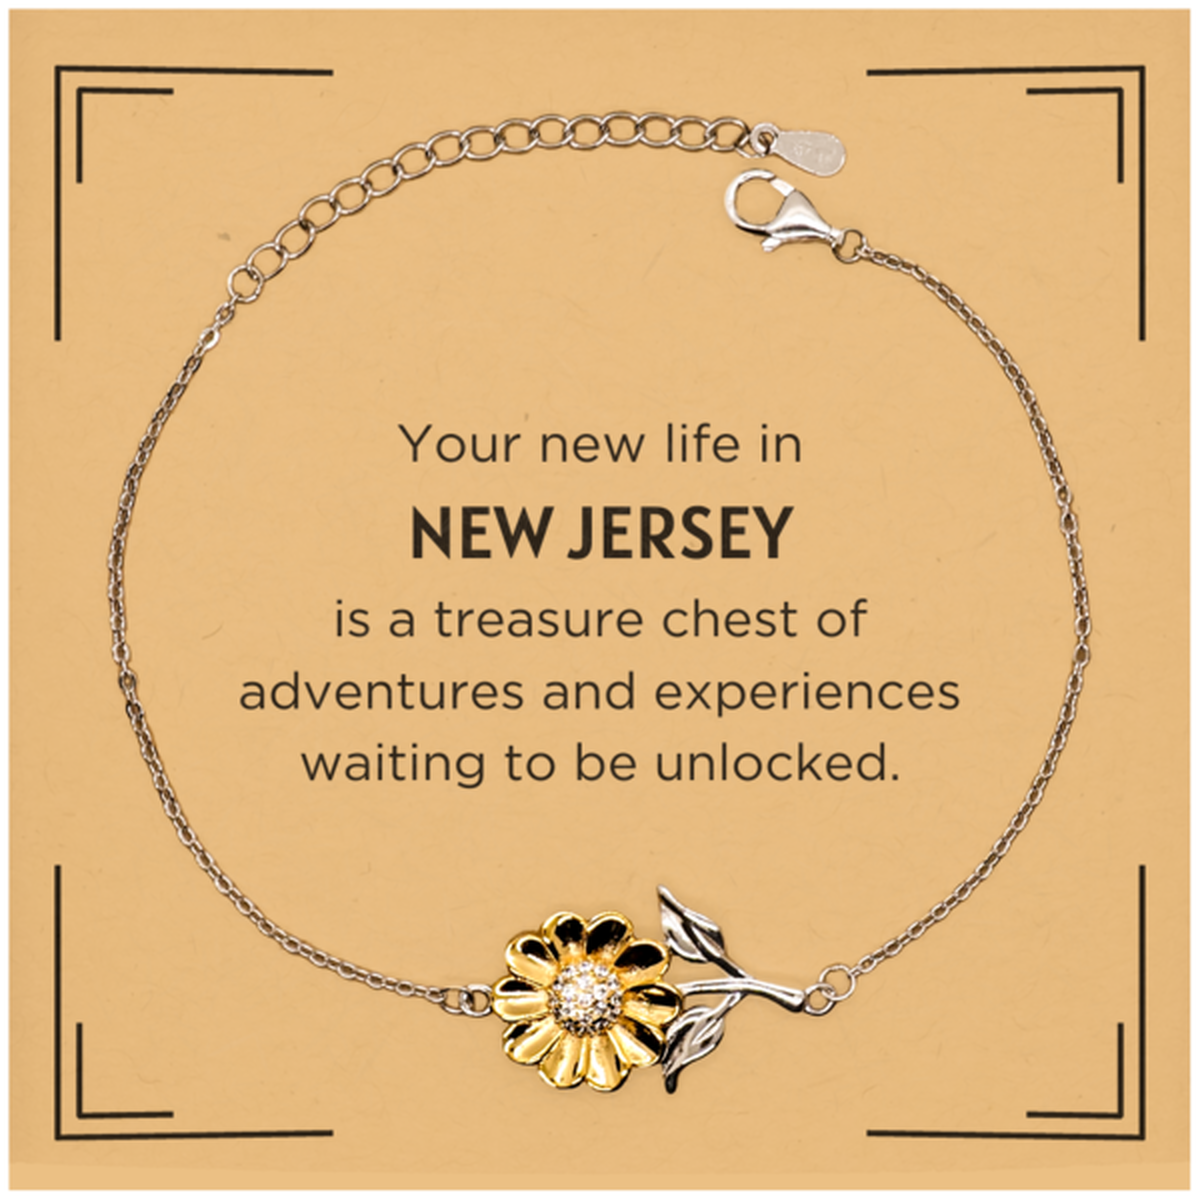 Moving to New Jersey Gifts, Your new life in New Jersey, Long Distance New Jersey Christmas Sunflower Bracelet For Men, Women, Friends, Coworkers